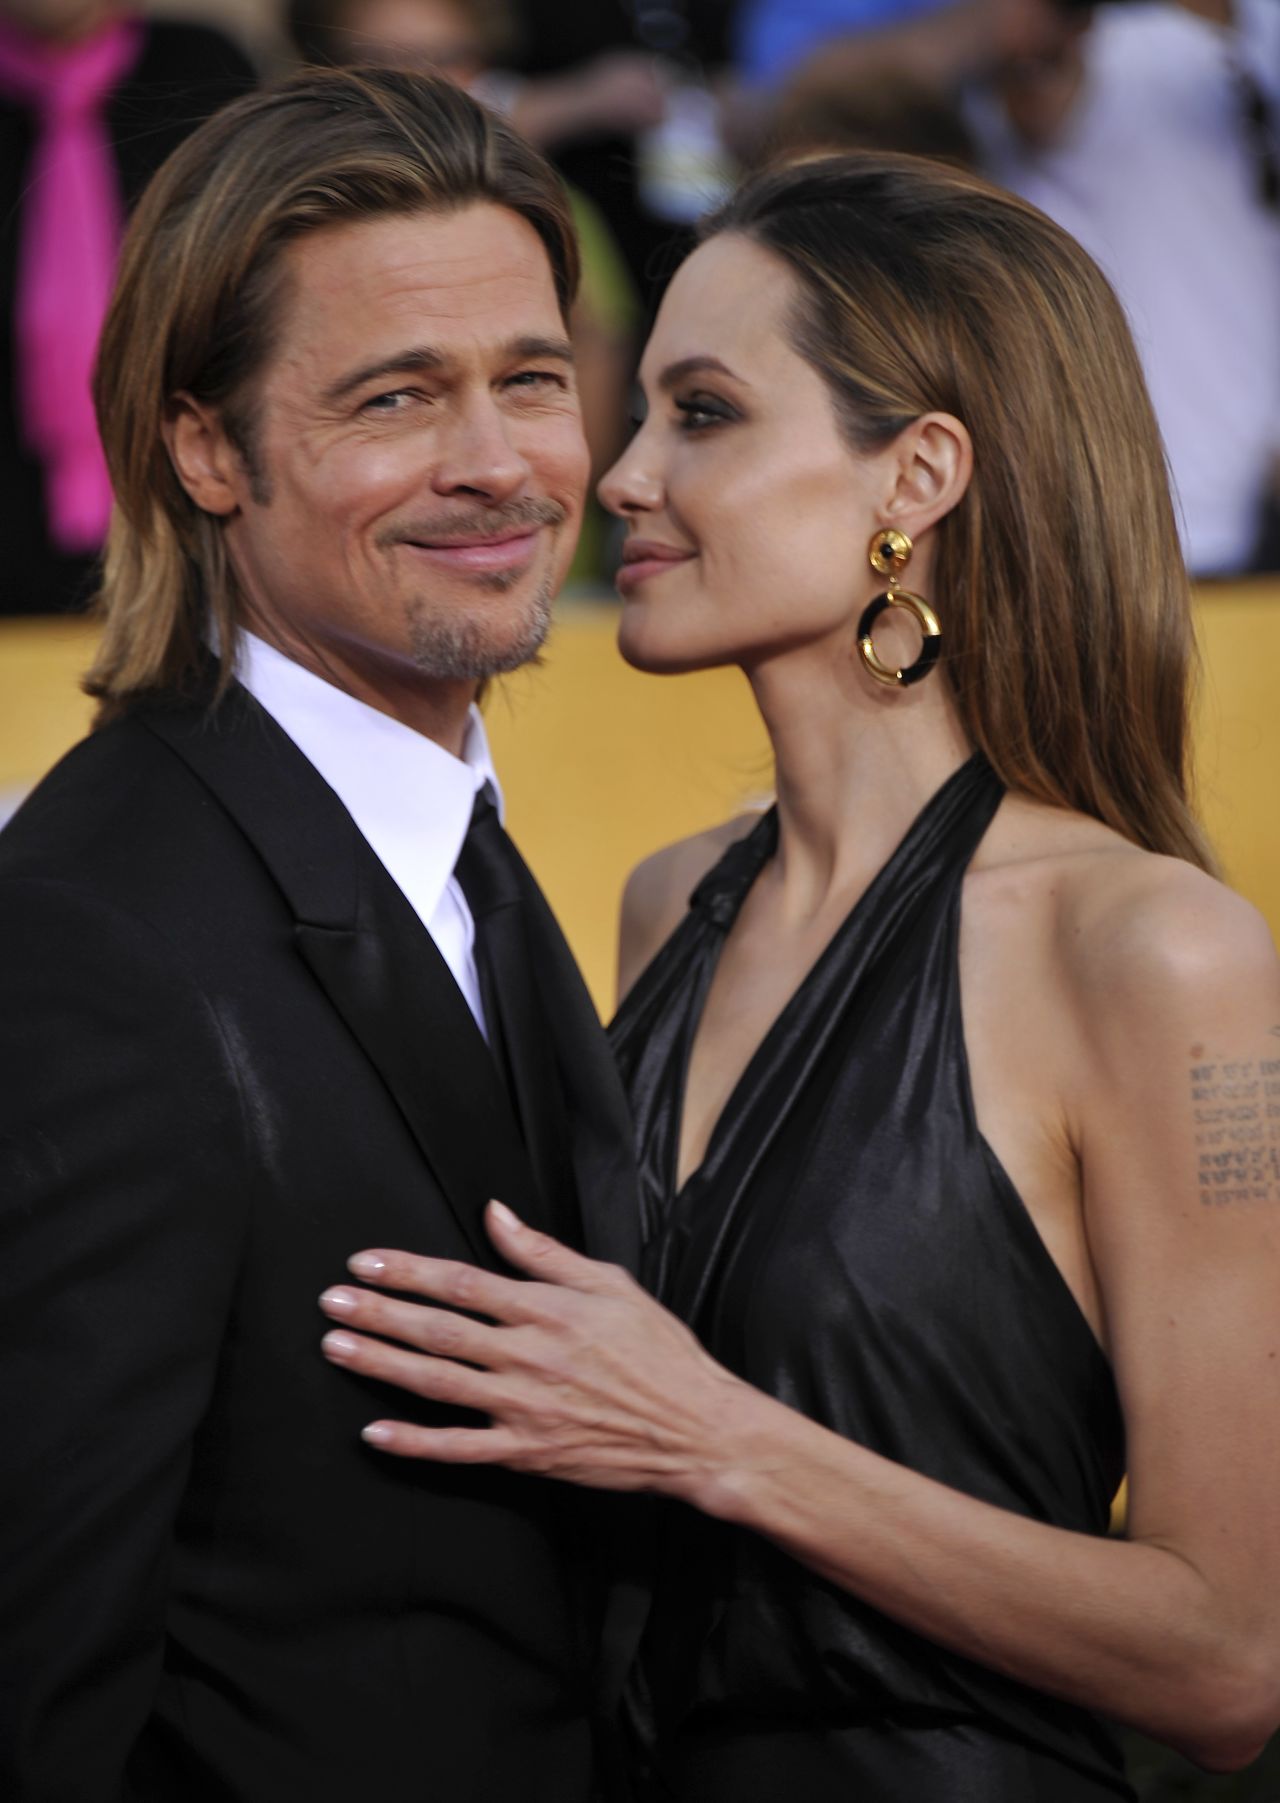 Pitt and Jolie are supporters of marriage equality and have said that they won't marry until everyone can. Yet the couple has taken one step closer to the altar this year as Pitt and Jolie announced their engagement in April, a few months after they were seen at the 2012 SAG Awards. The two were prompted by their kids to get engaged, Pitt told CNN in November 2012, but he clarified that they're also getting married for themselves.